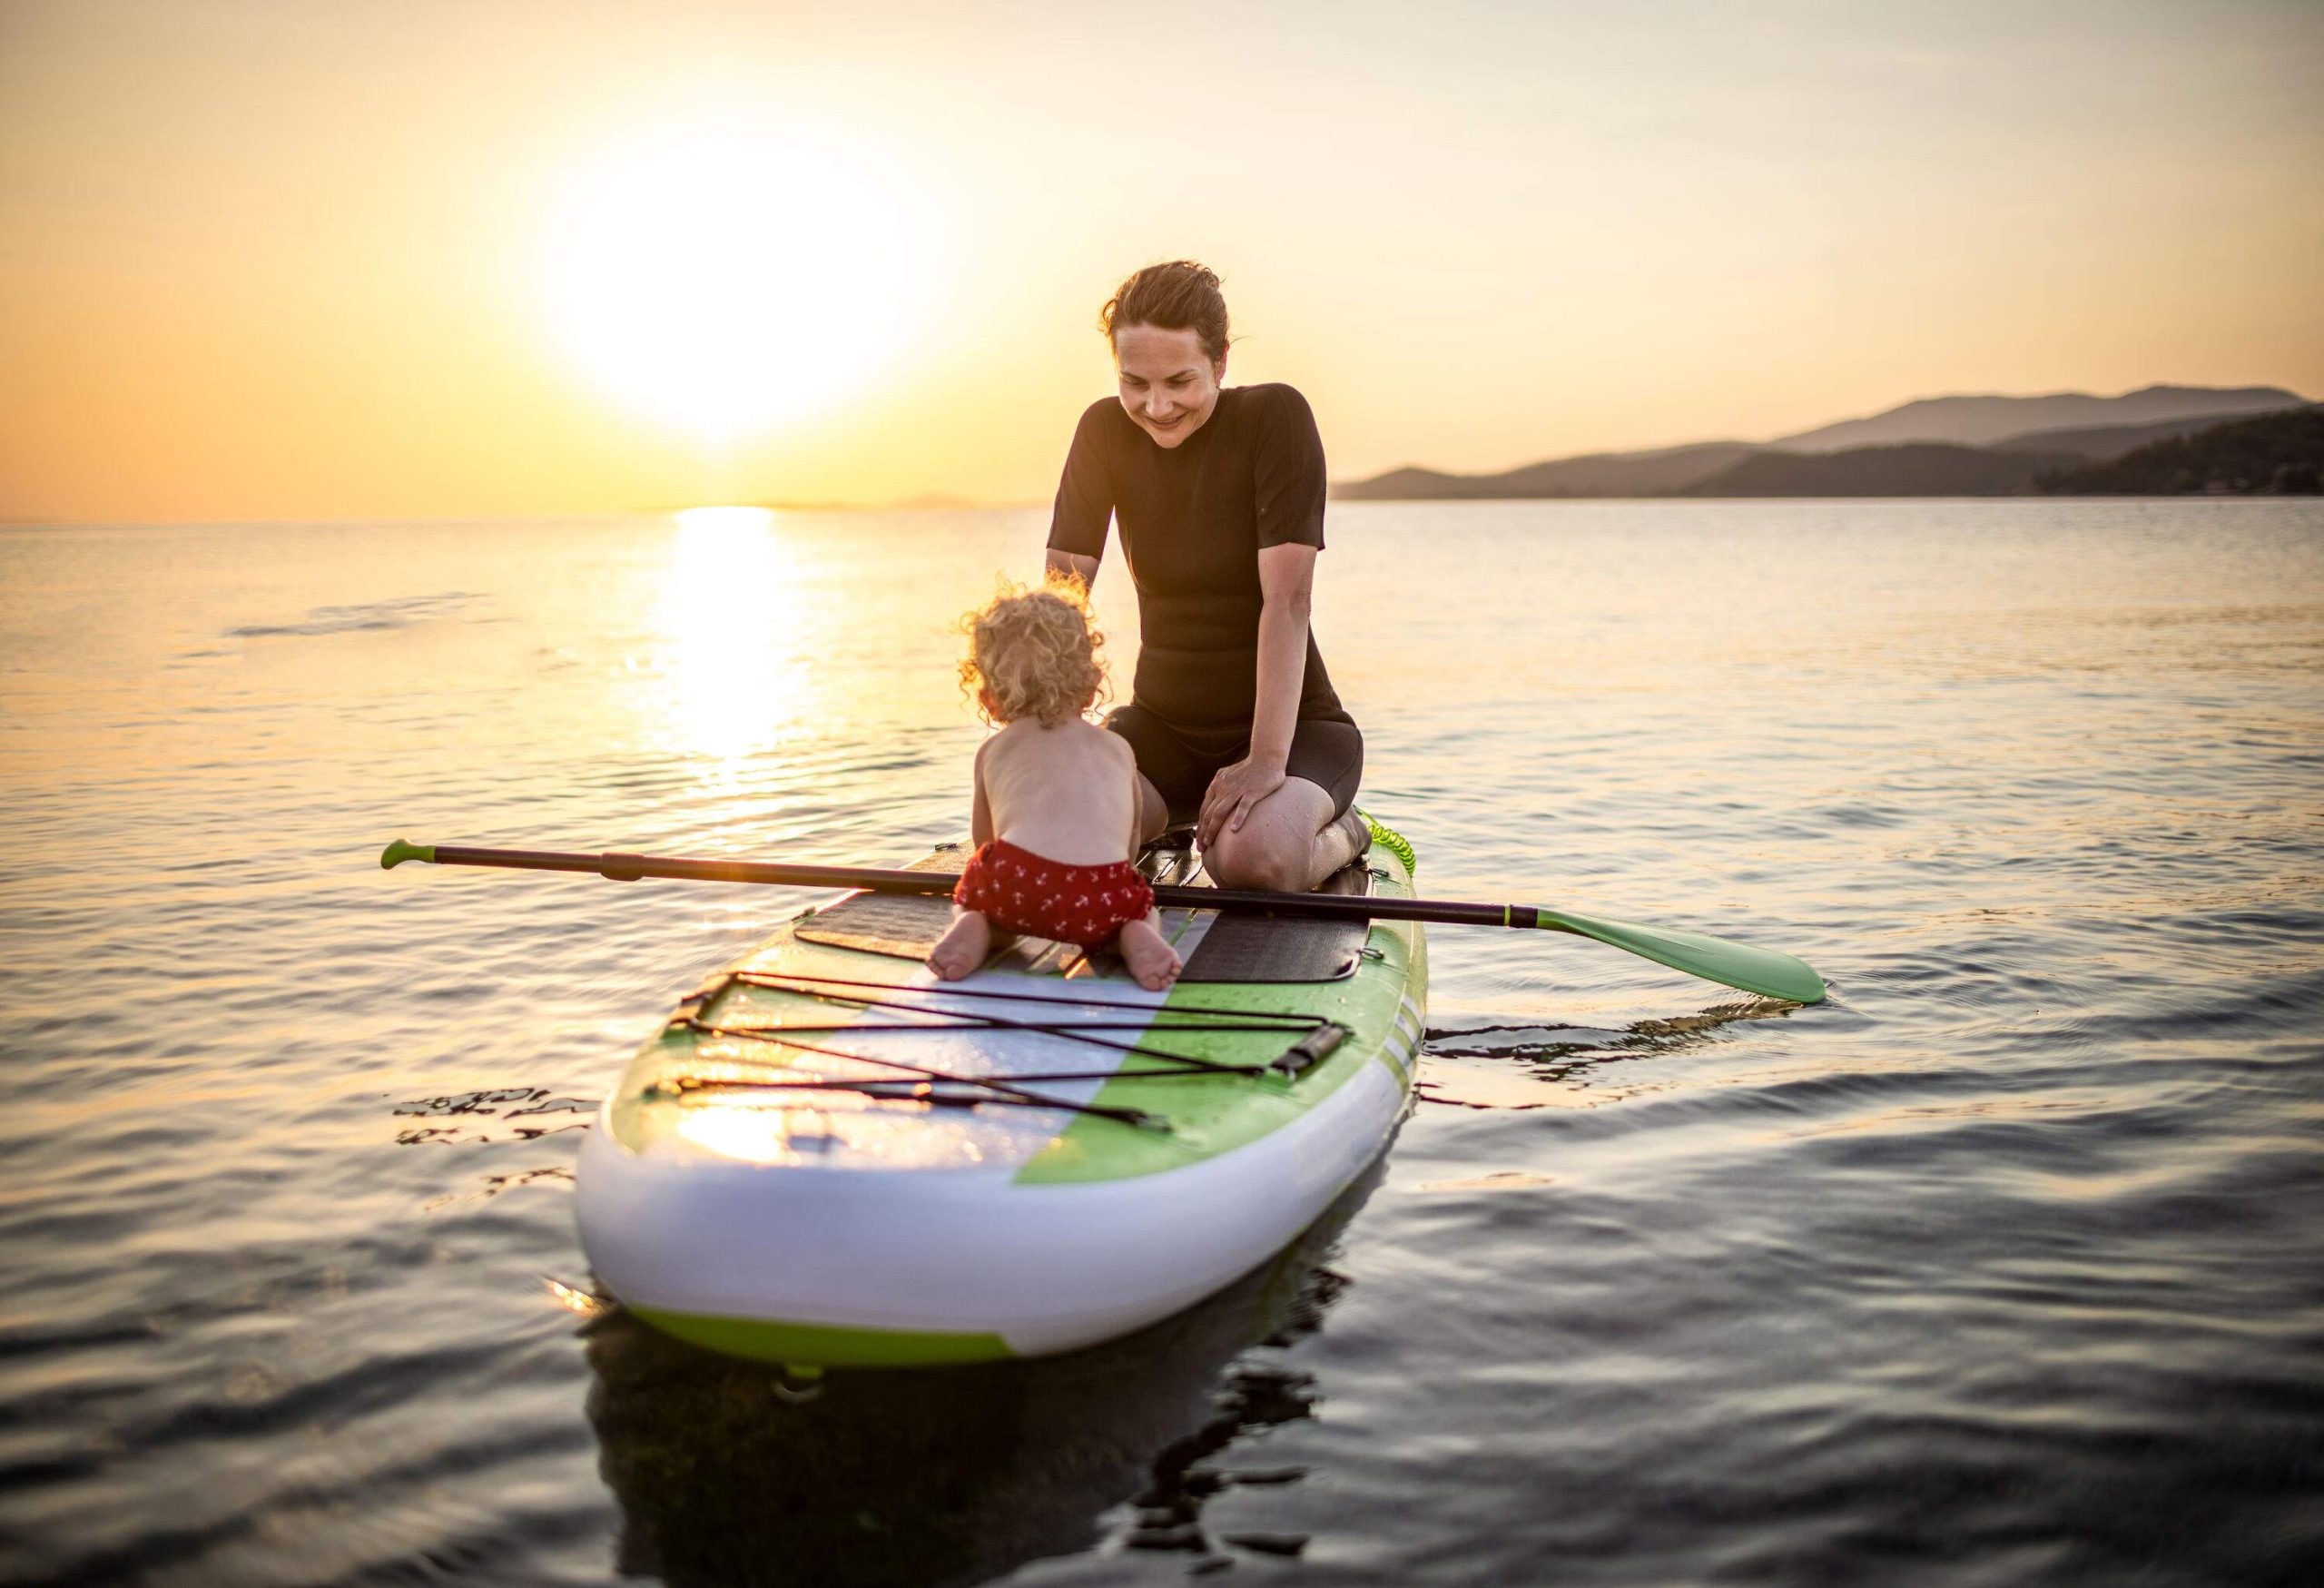 A woman and a little boy riding a paddleboard in the sea.